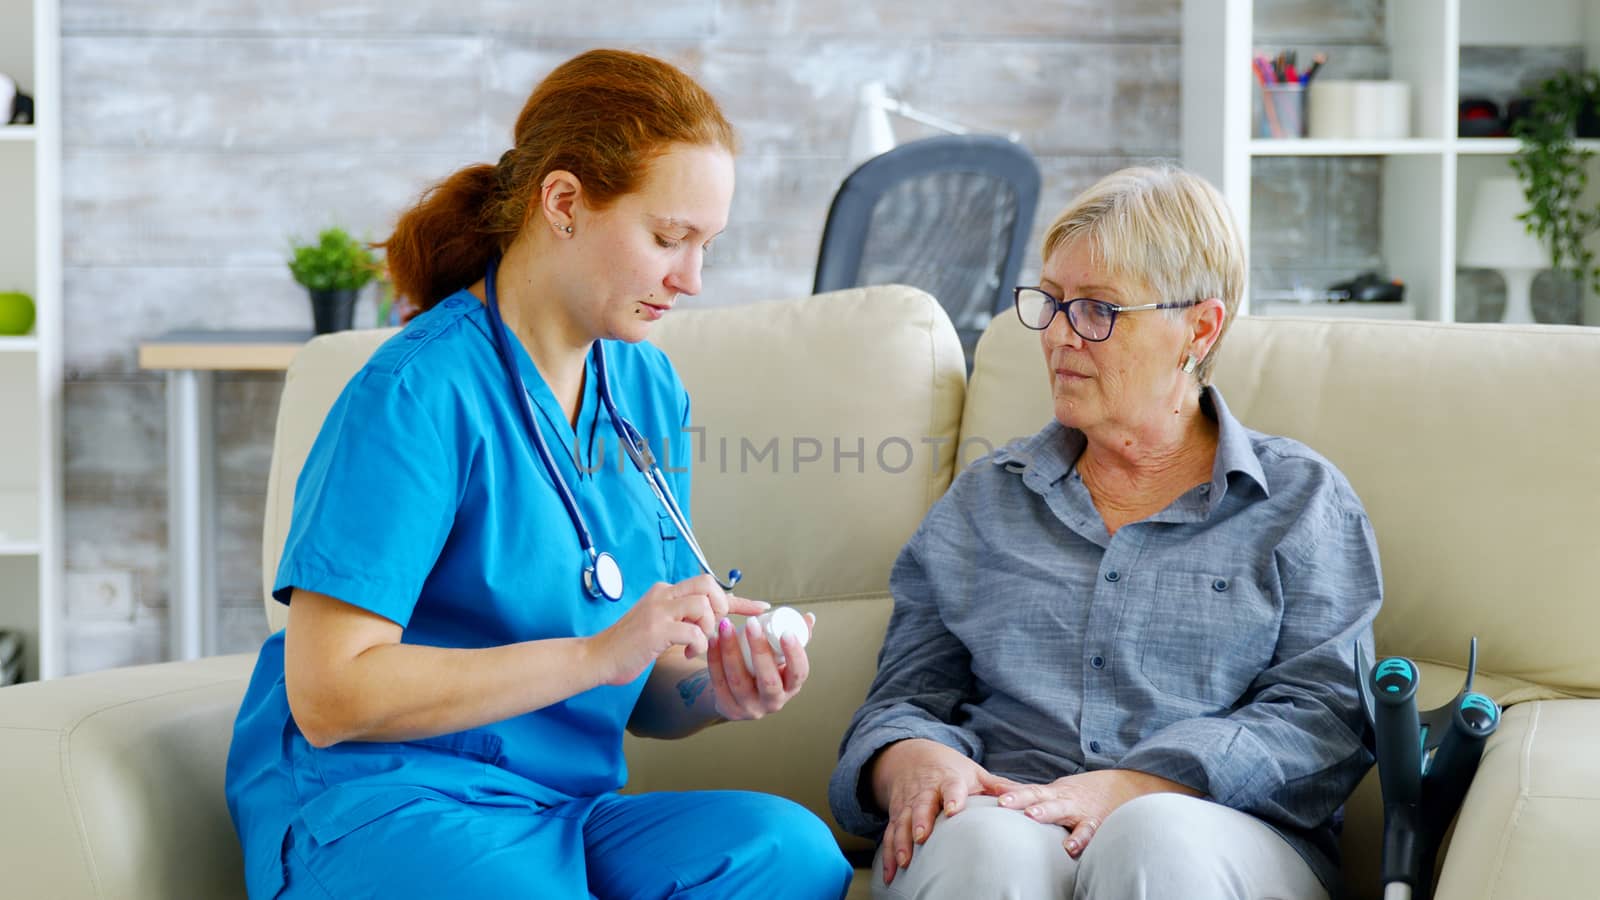 Female doctor consultin a senior woman about pills dosage and subscription, they are in a nursing home